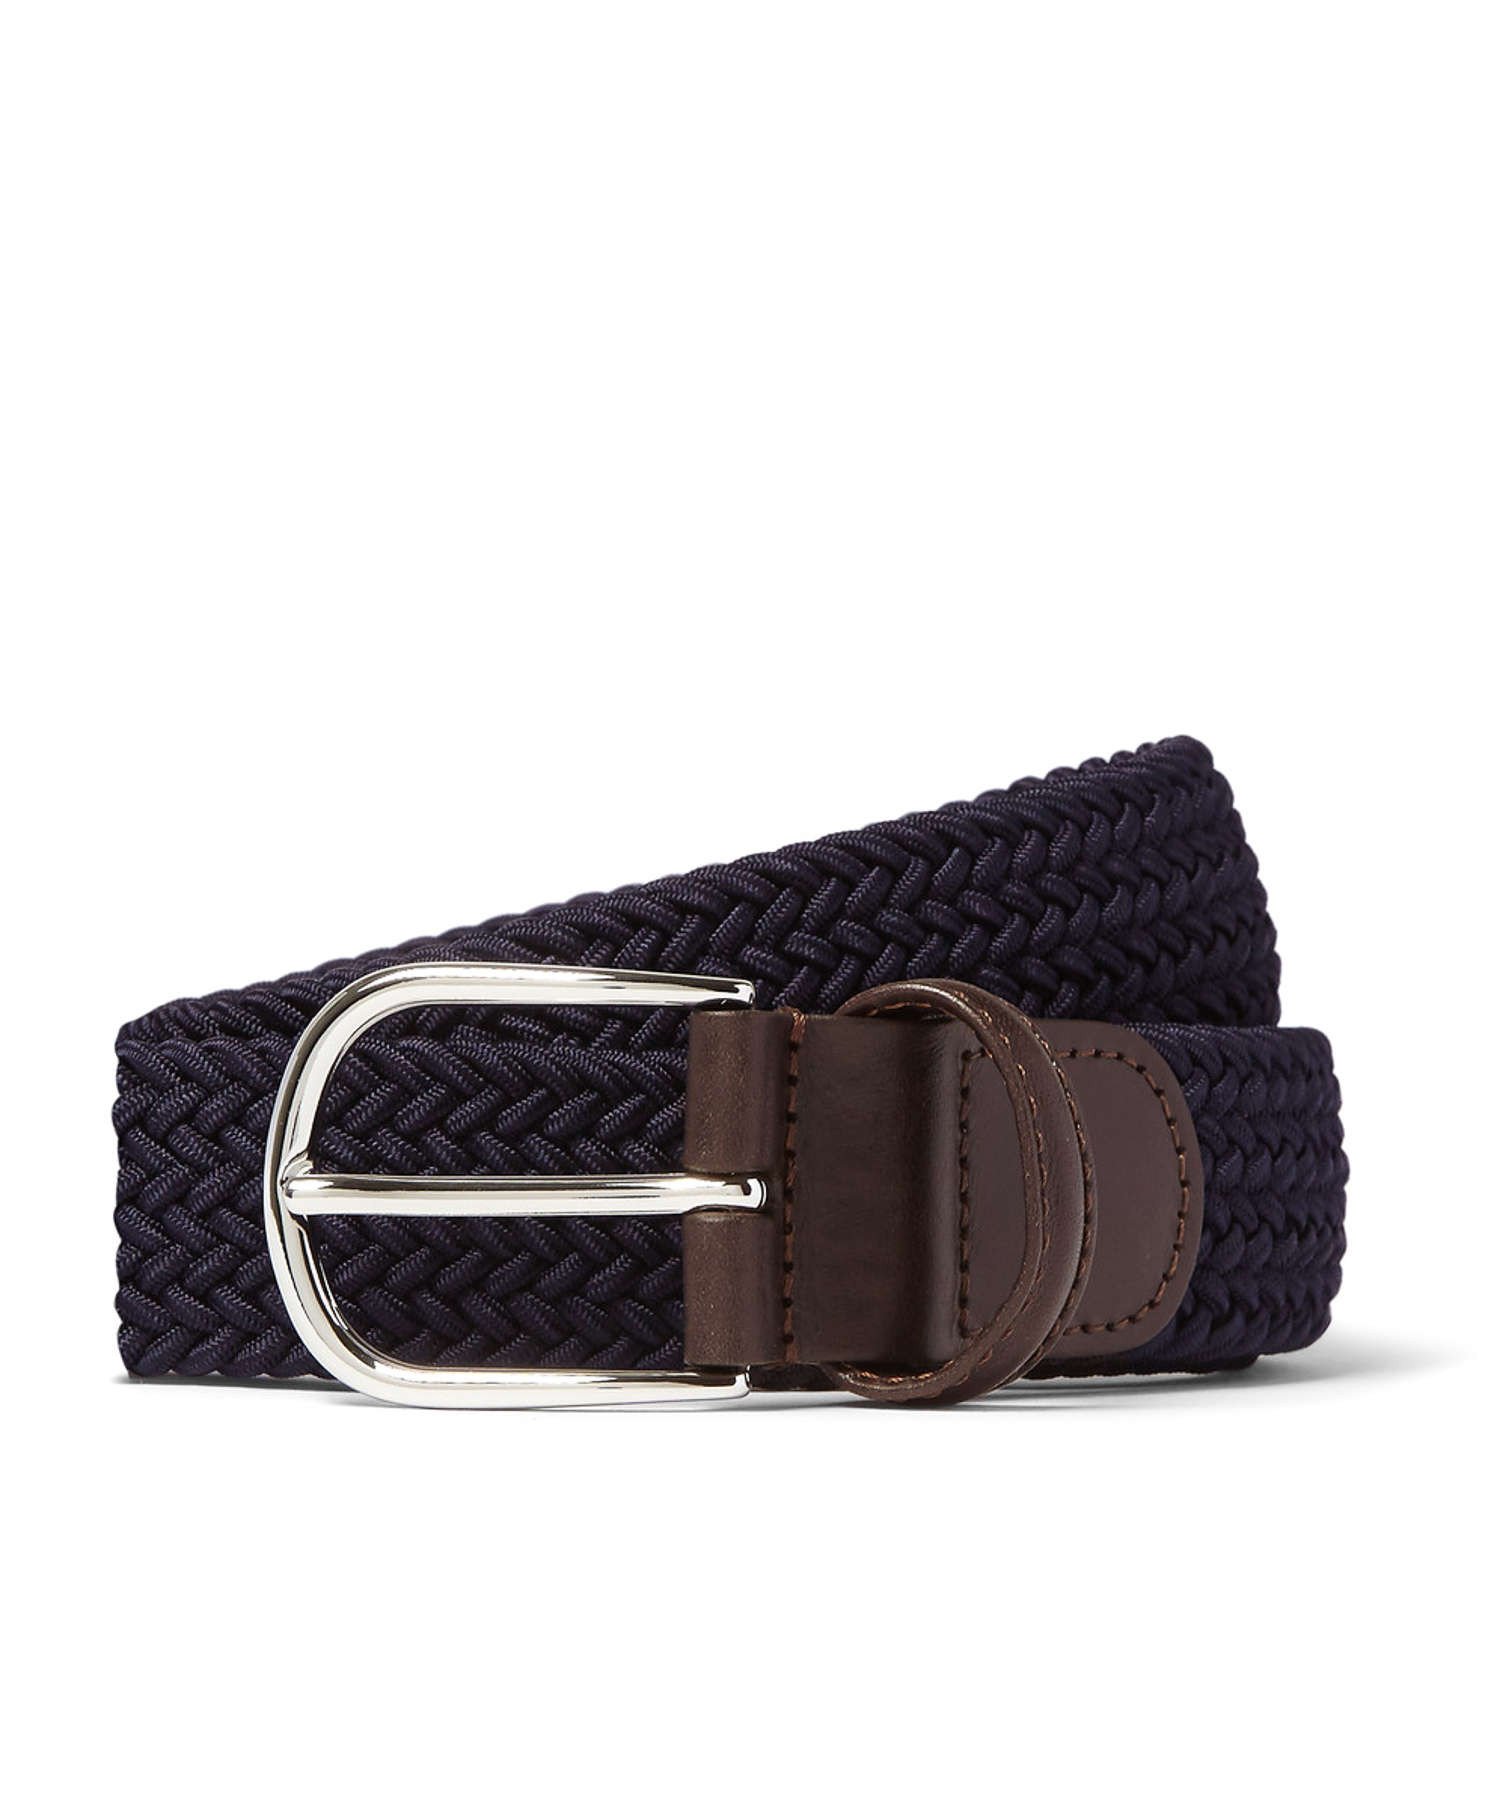 Anderson’s Leather Stretch Woven Belt in Navy | The Fashionisto